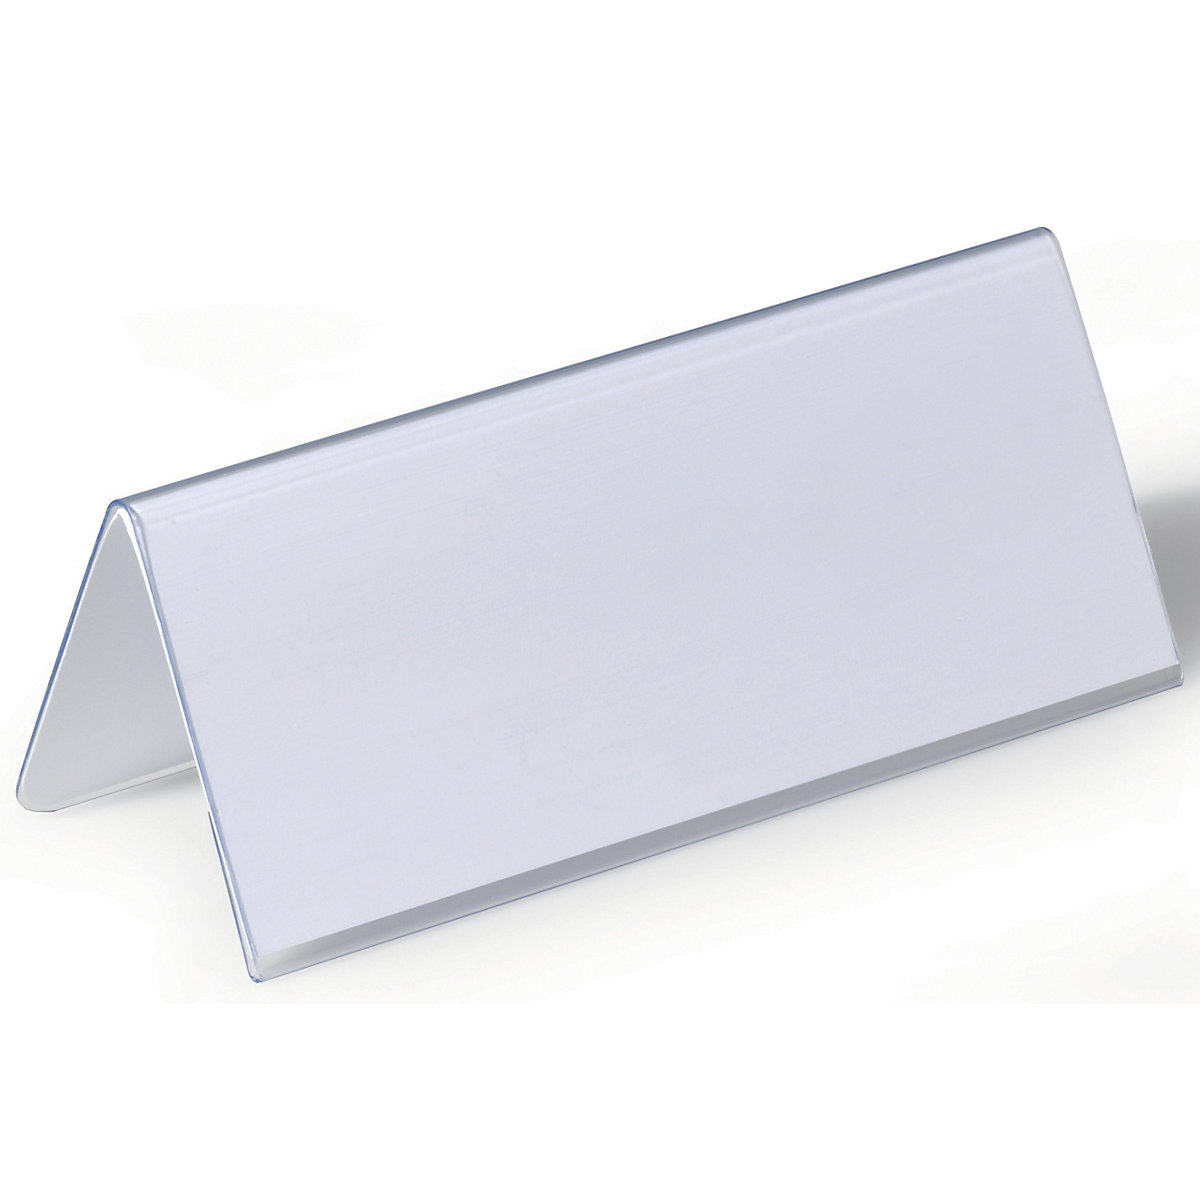 Table place name holder made of hard foil - DURABLE